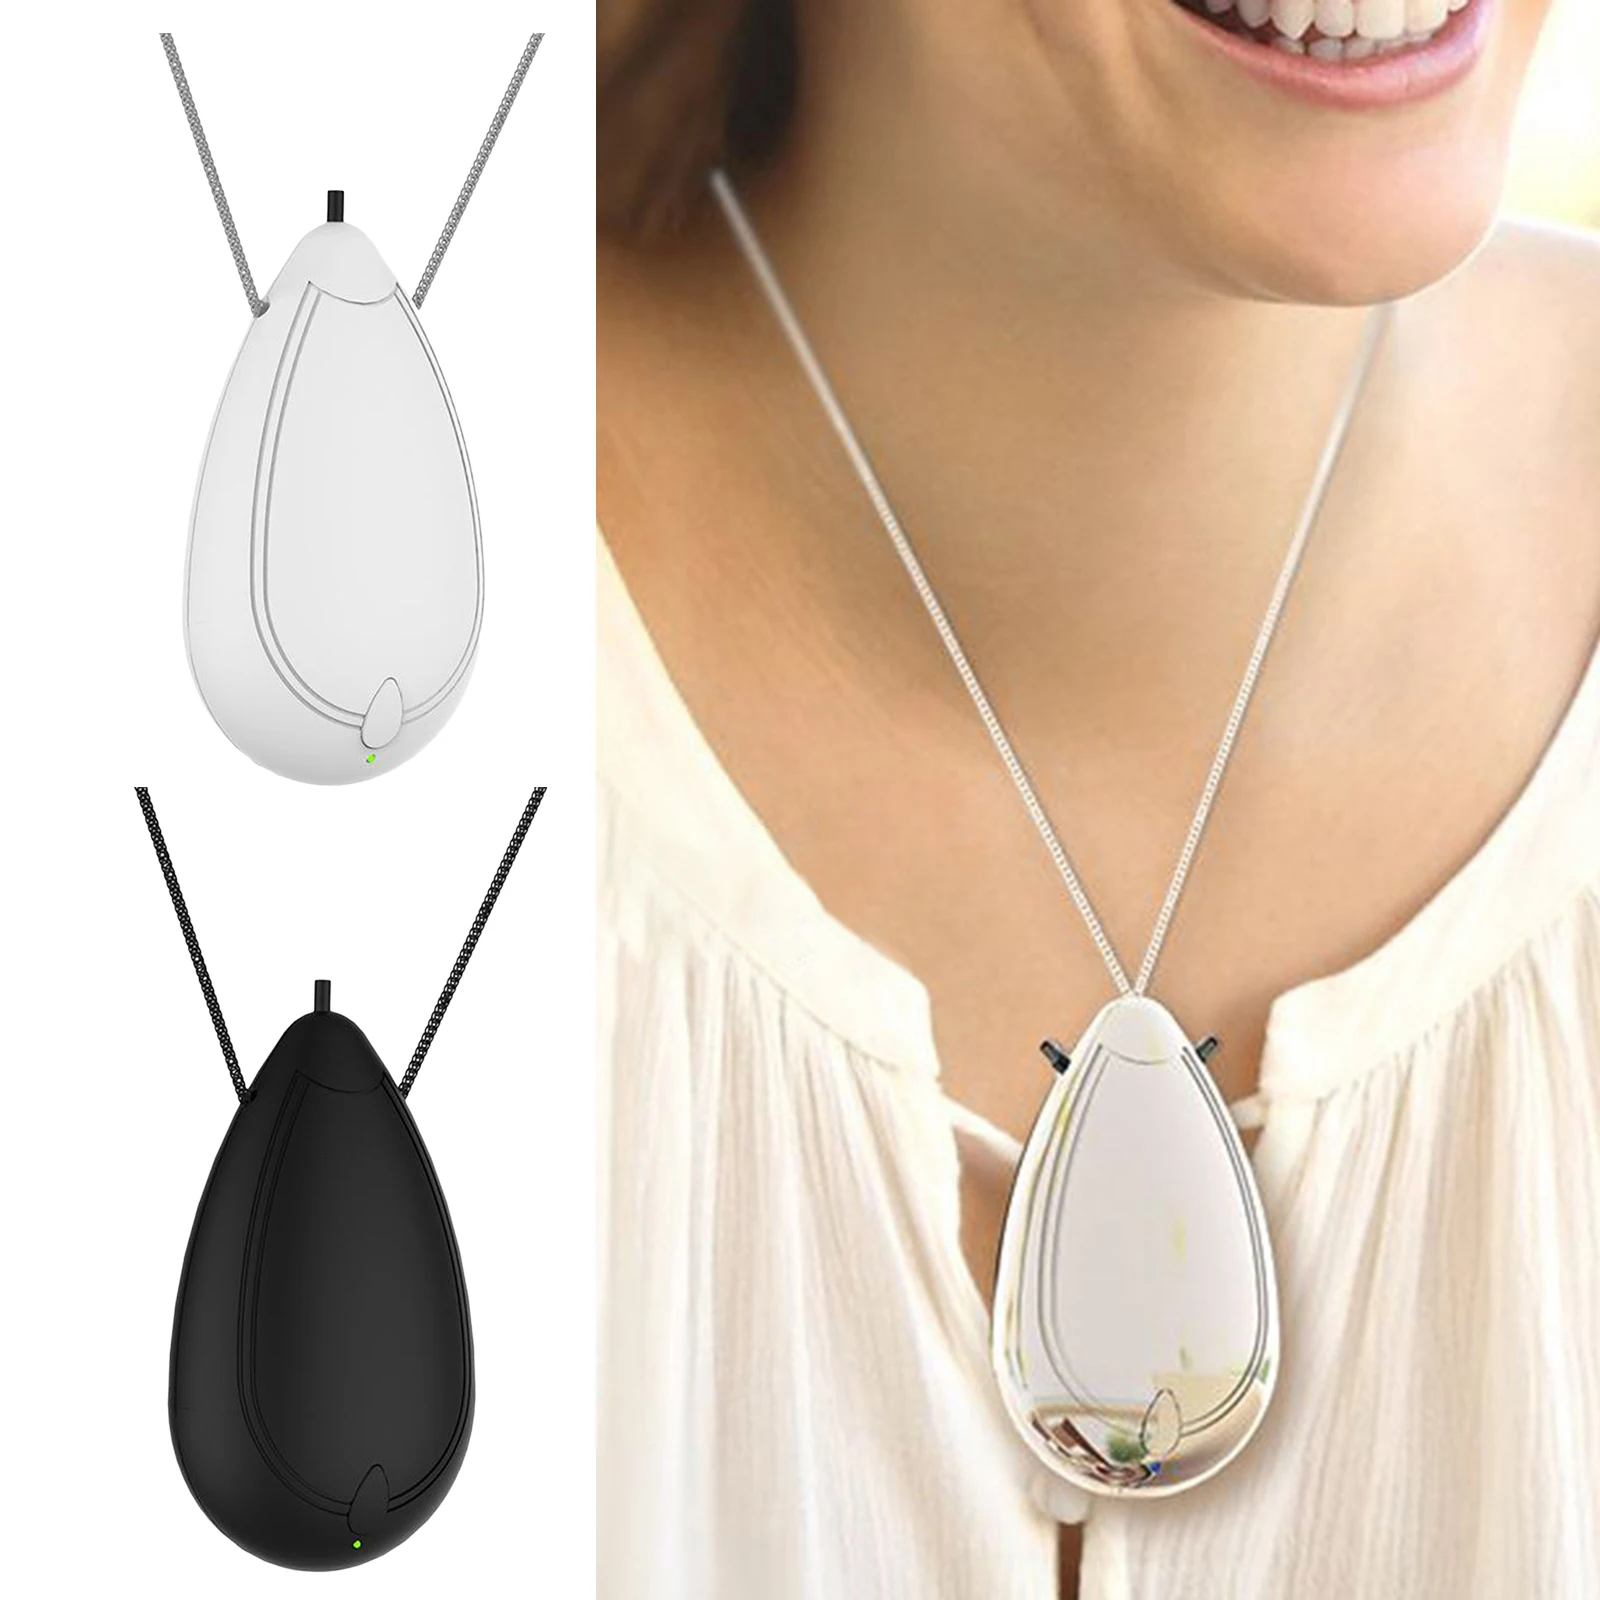 USB Mini Air Purifier Necklace Personals Wearable Negative Ion AIR